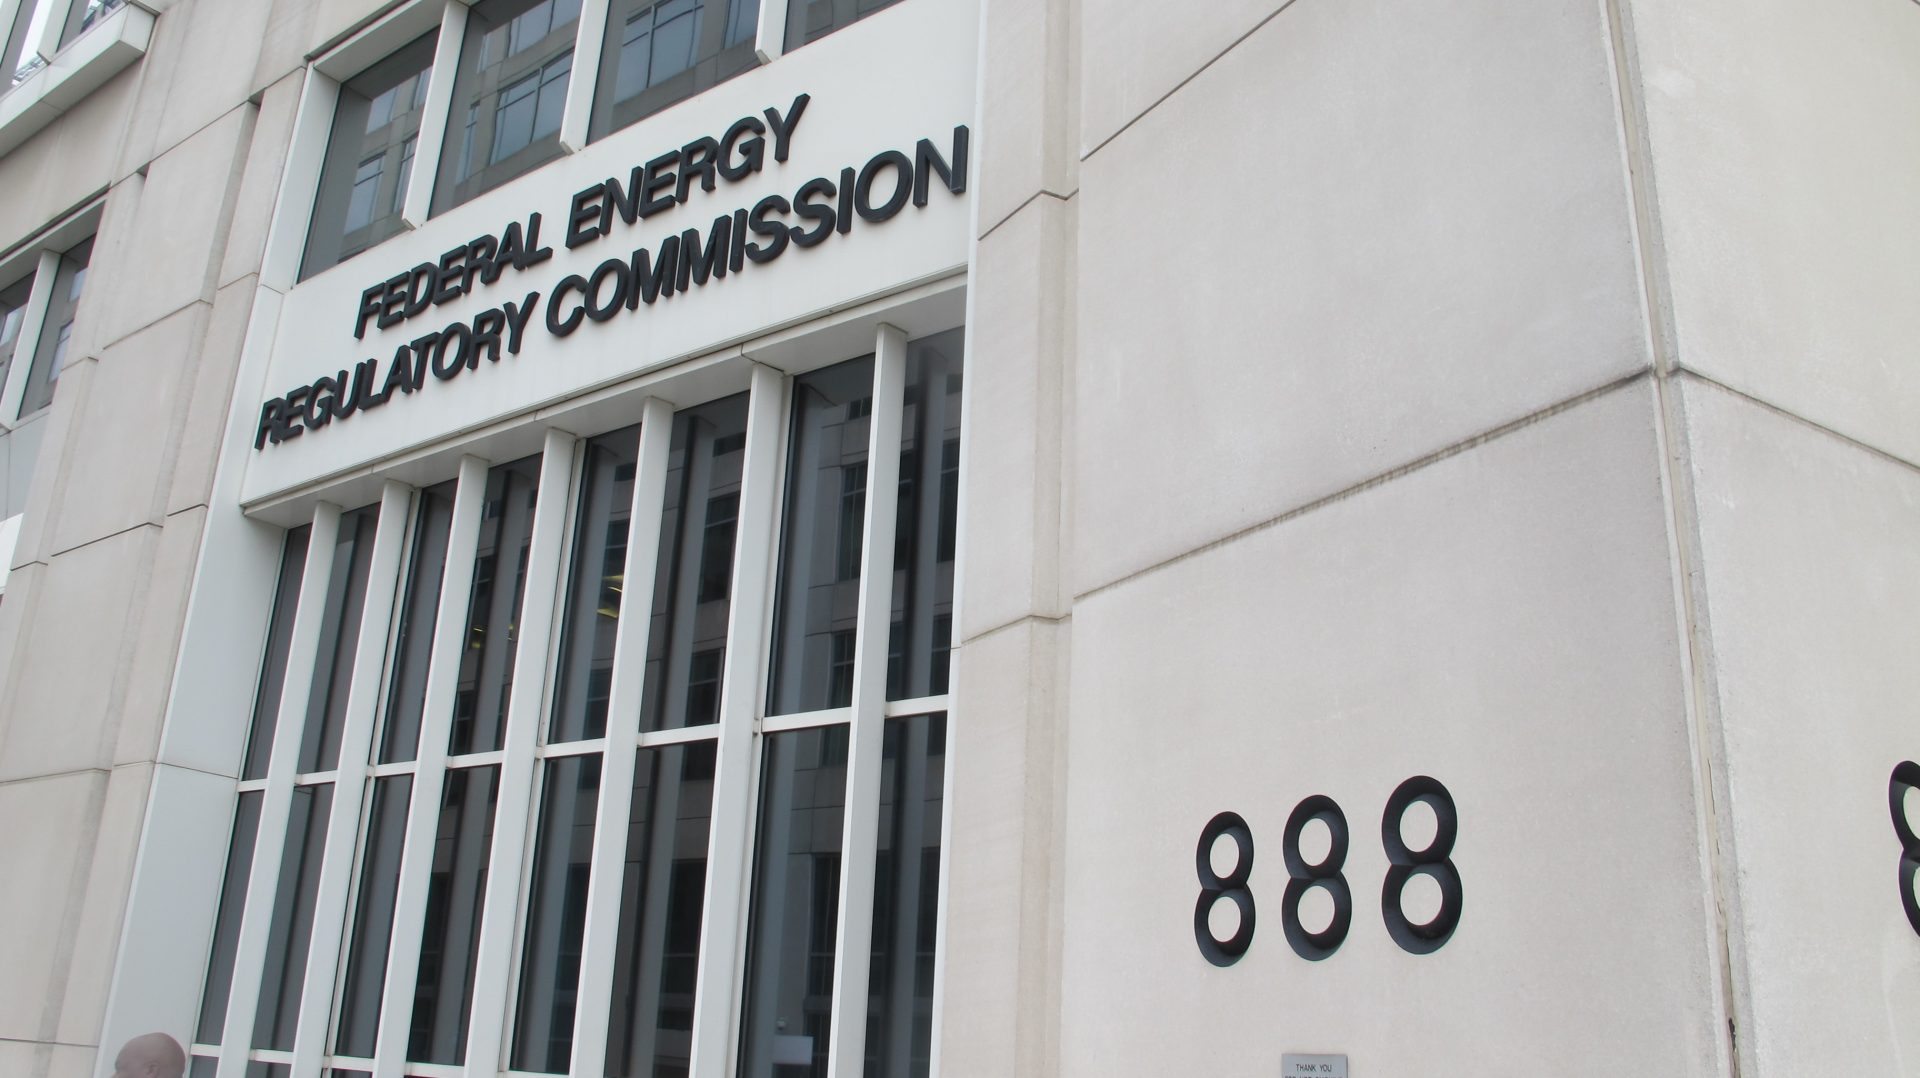 FERC's headquarters in Washington, DC. The agency said it will review its longstanding policy on certification of natural gas pipelines.